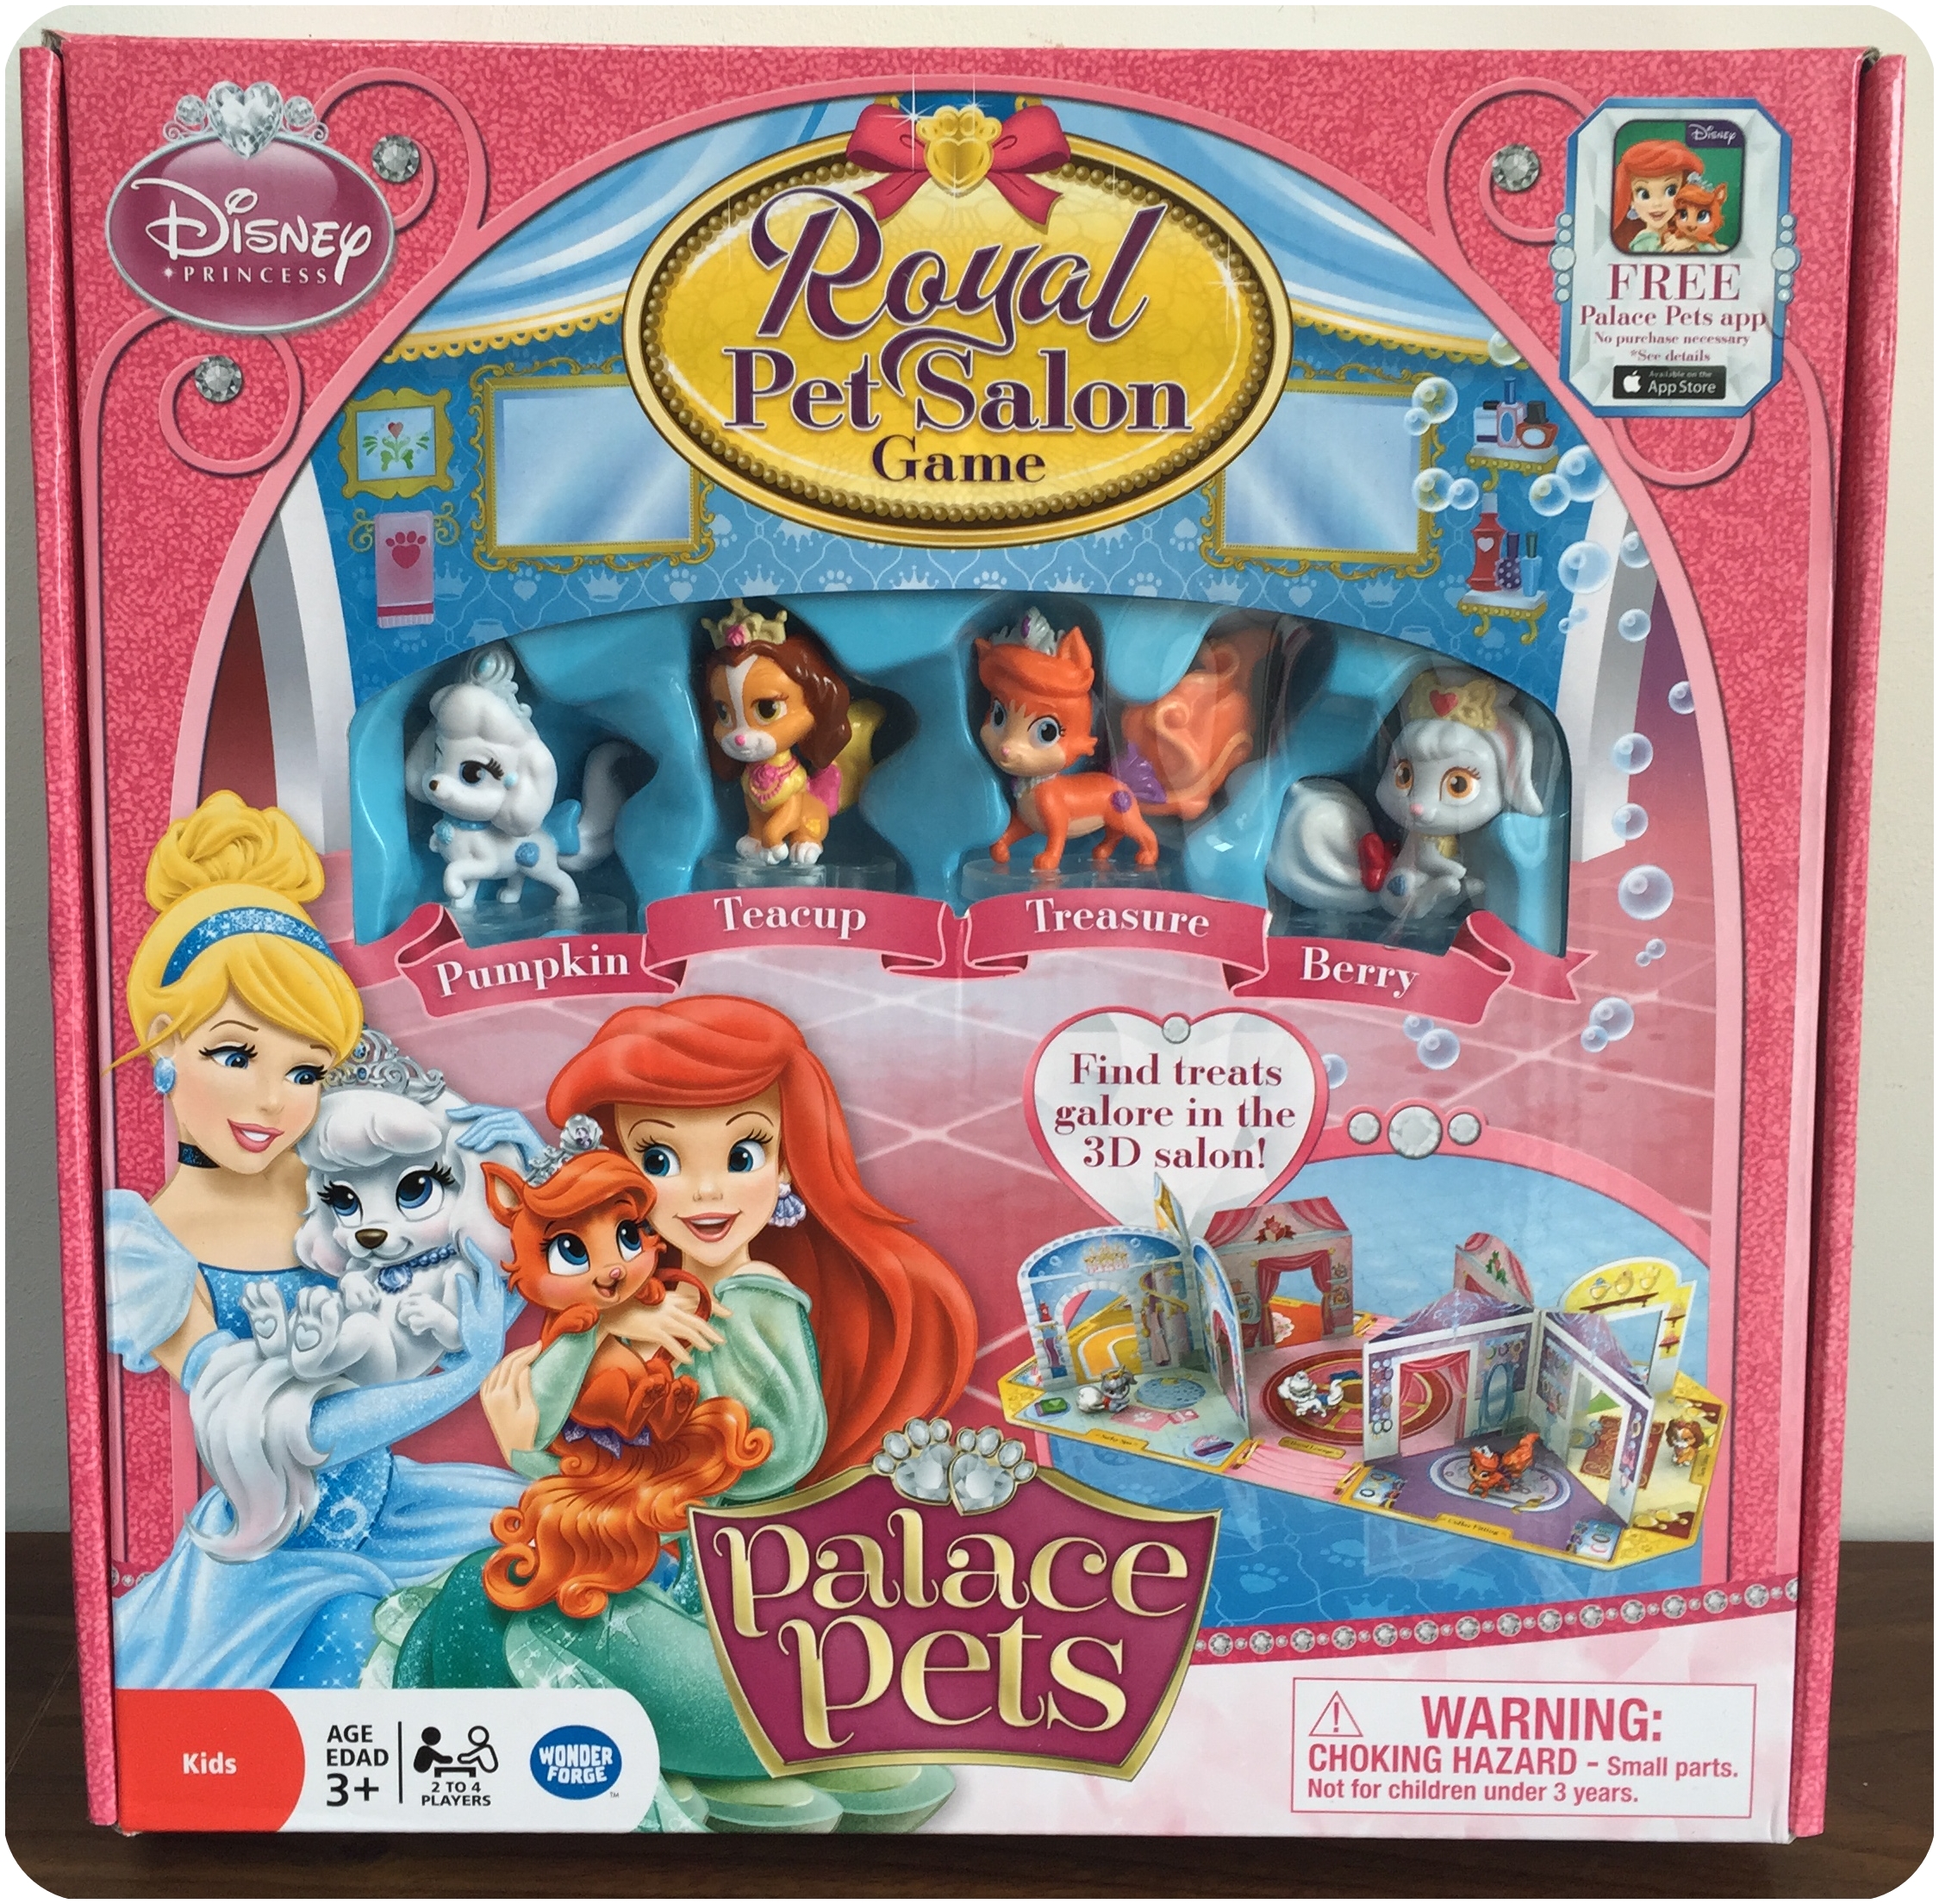 Toys and Games Review : Palace Pets from Esdevium games